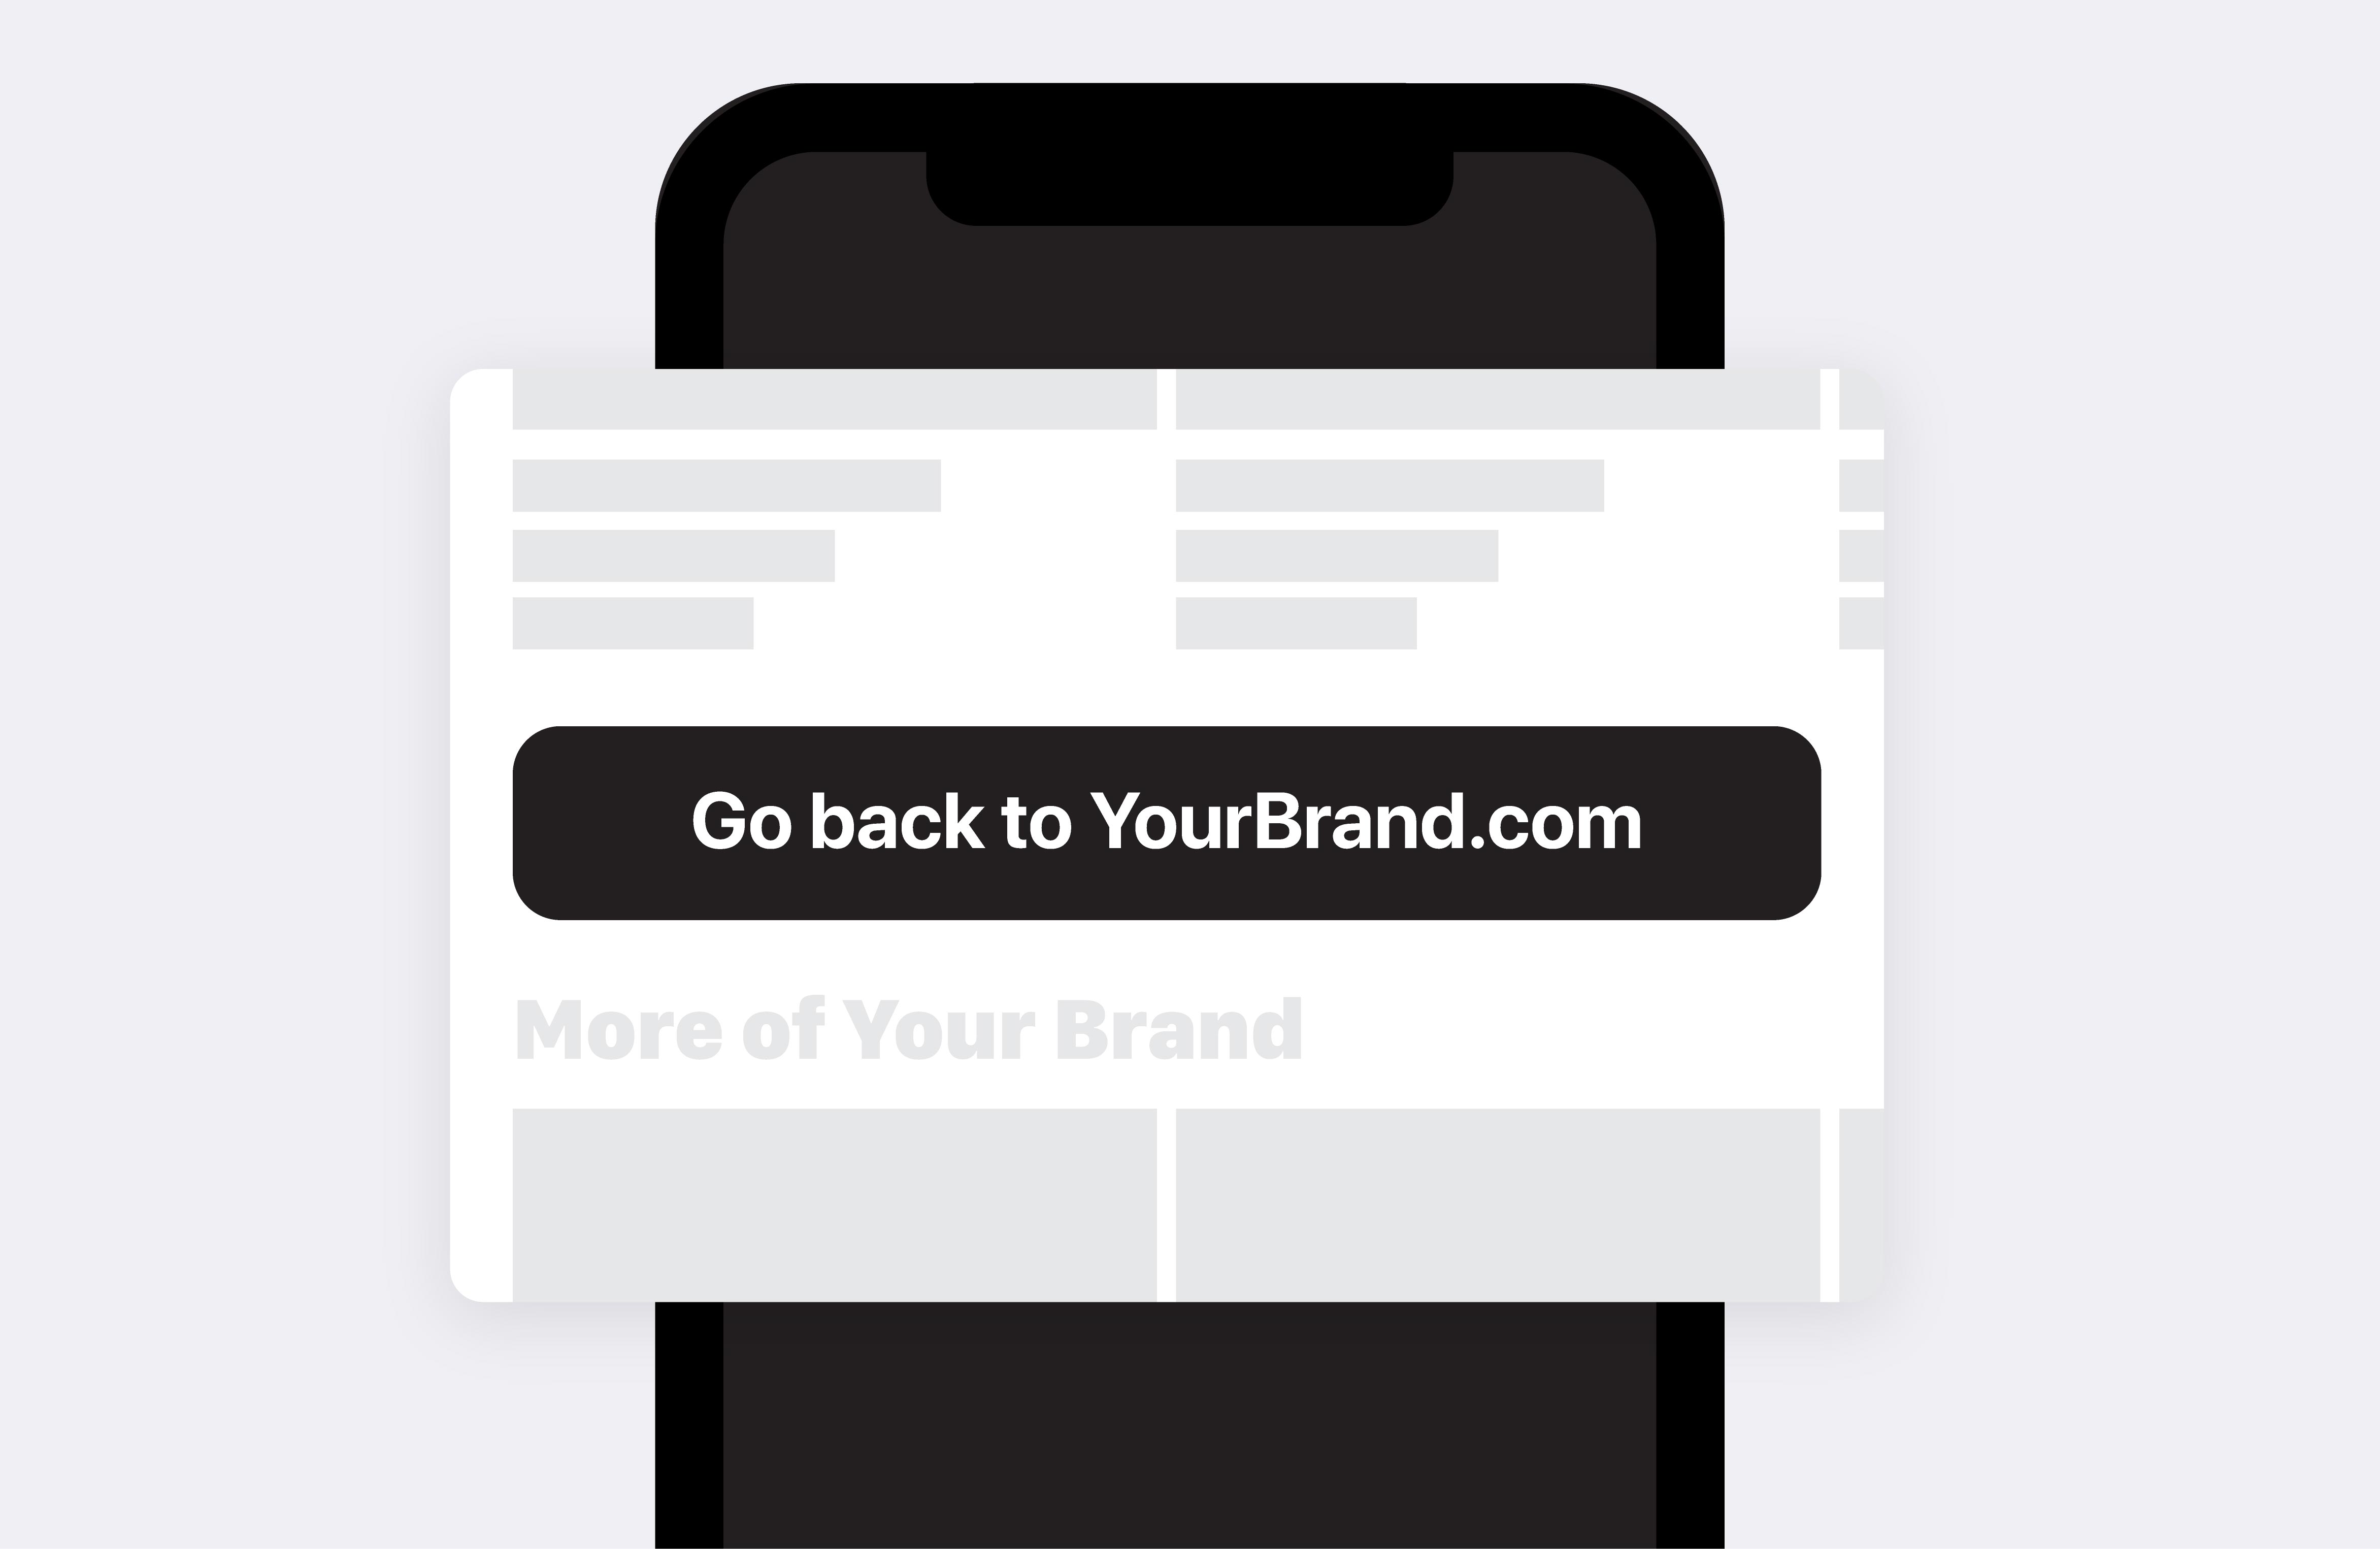 Go back to the brand's webpage button on the app